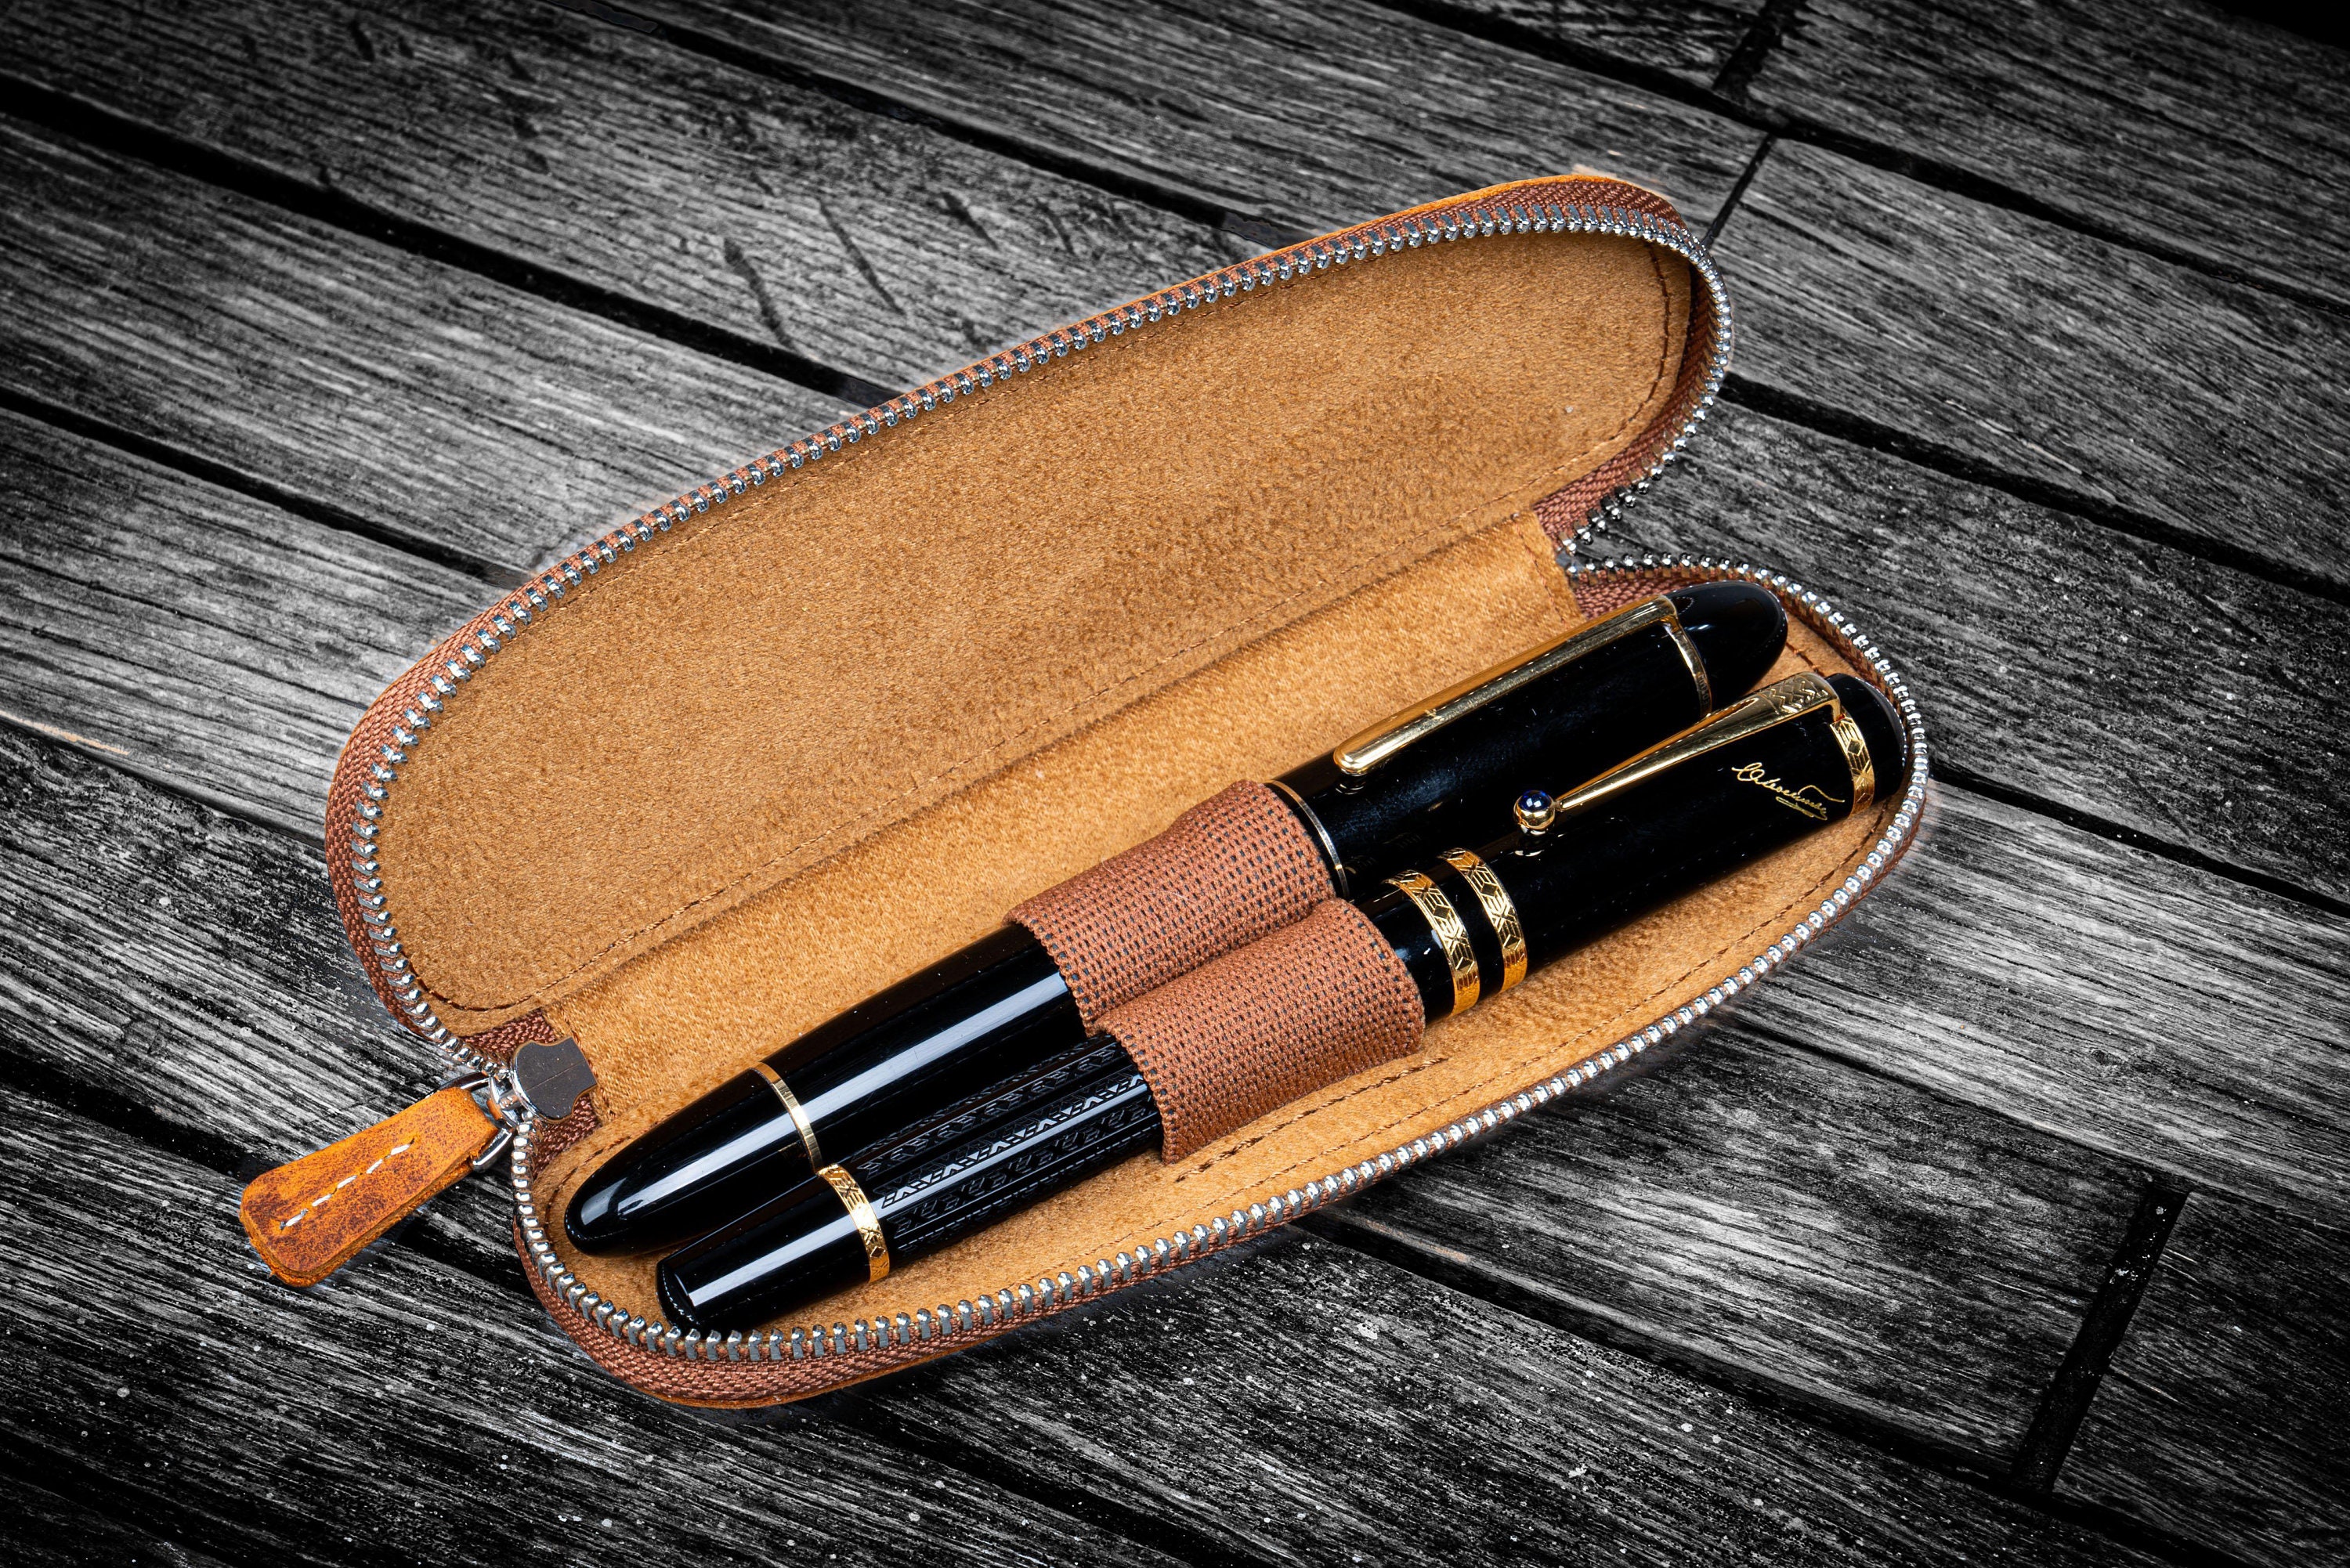 The Old School - Leather Molded Pen Case for 5 Pens - Distressed Leather